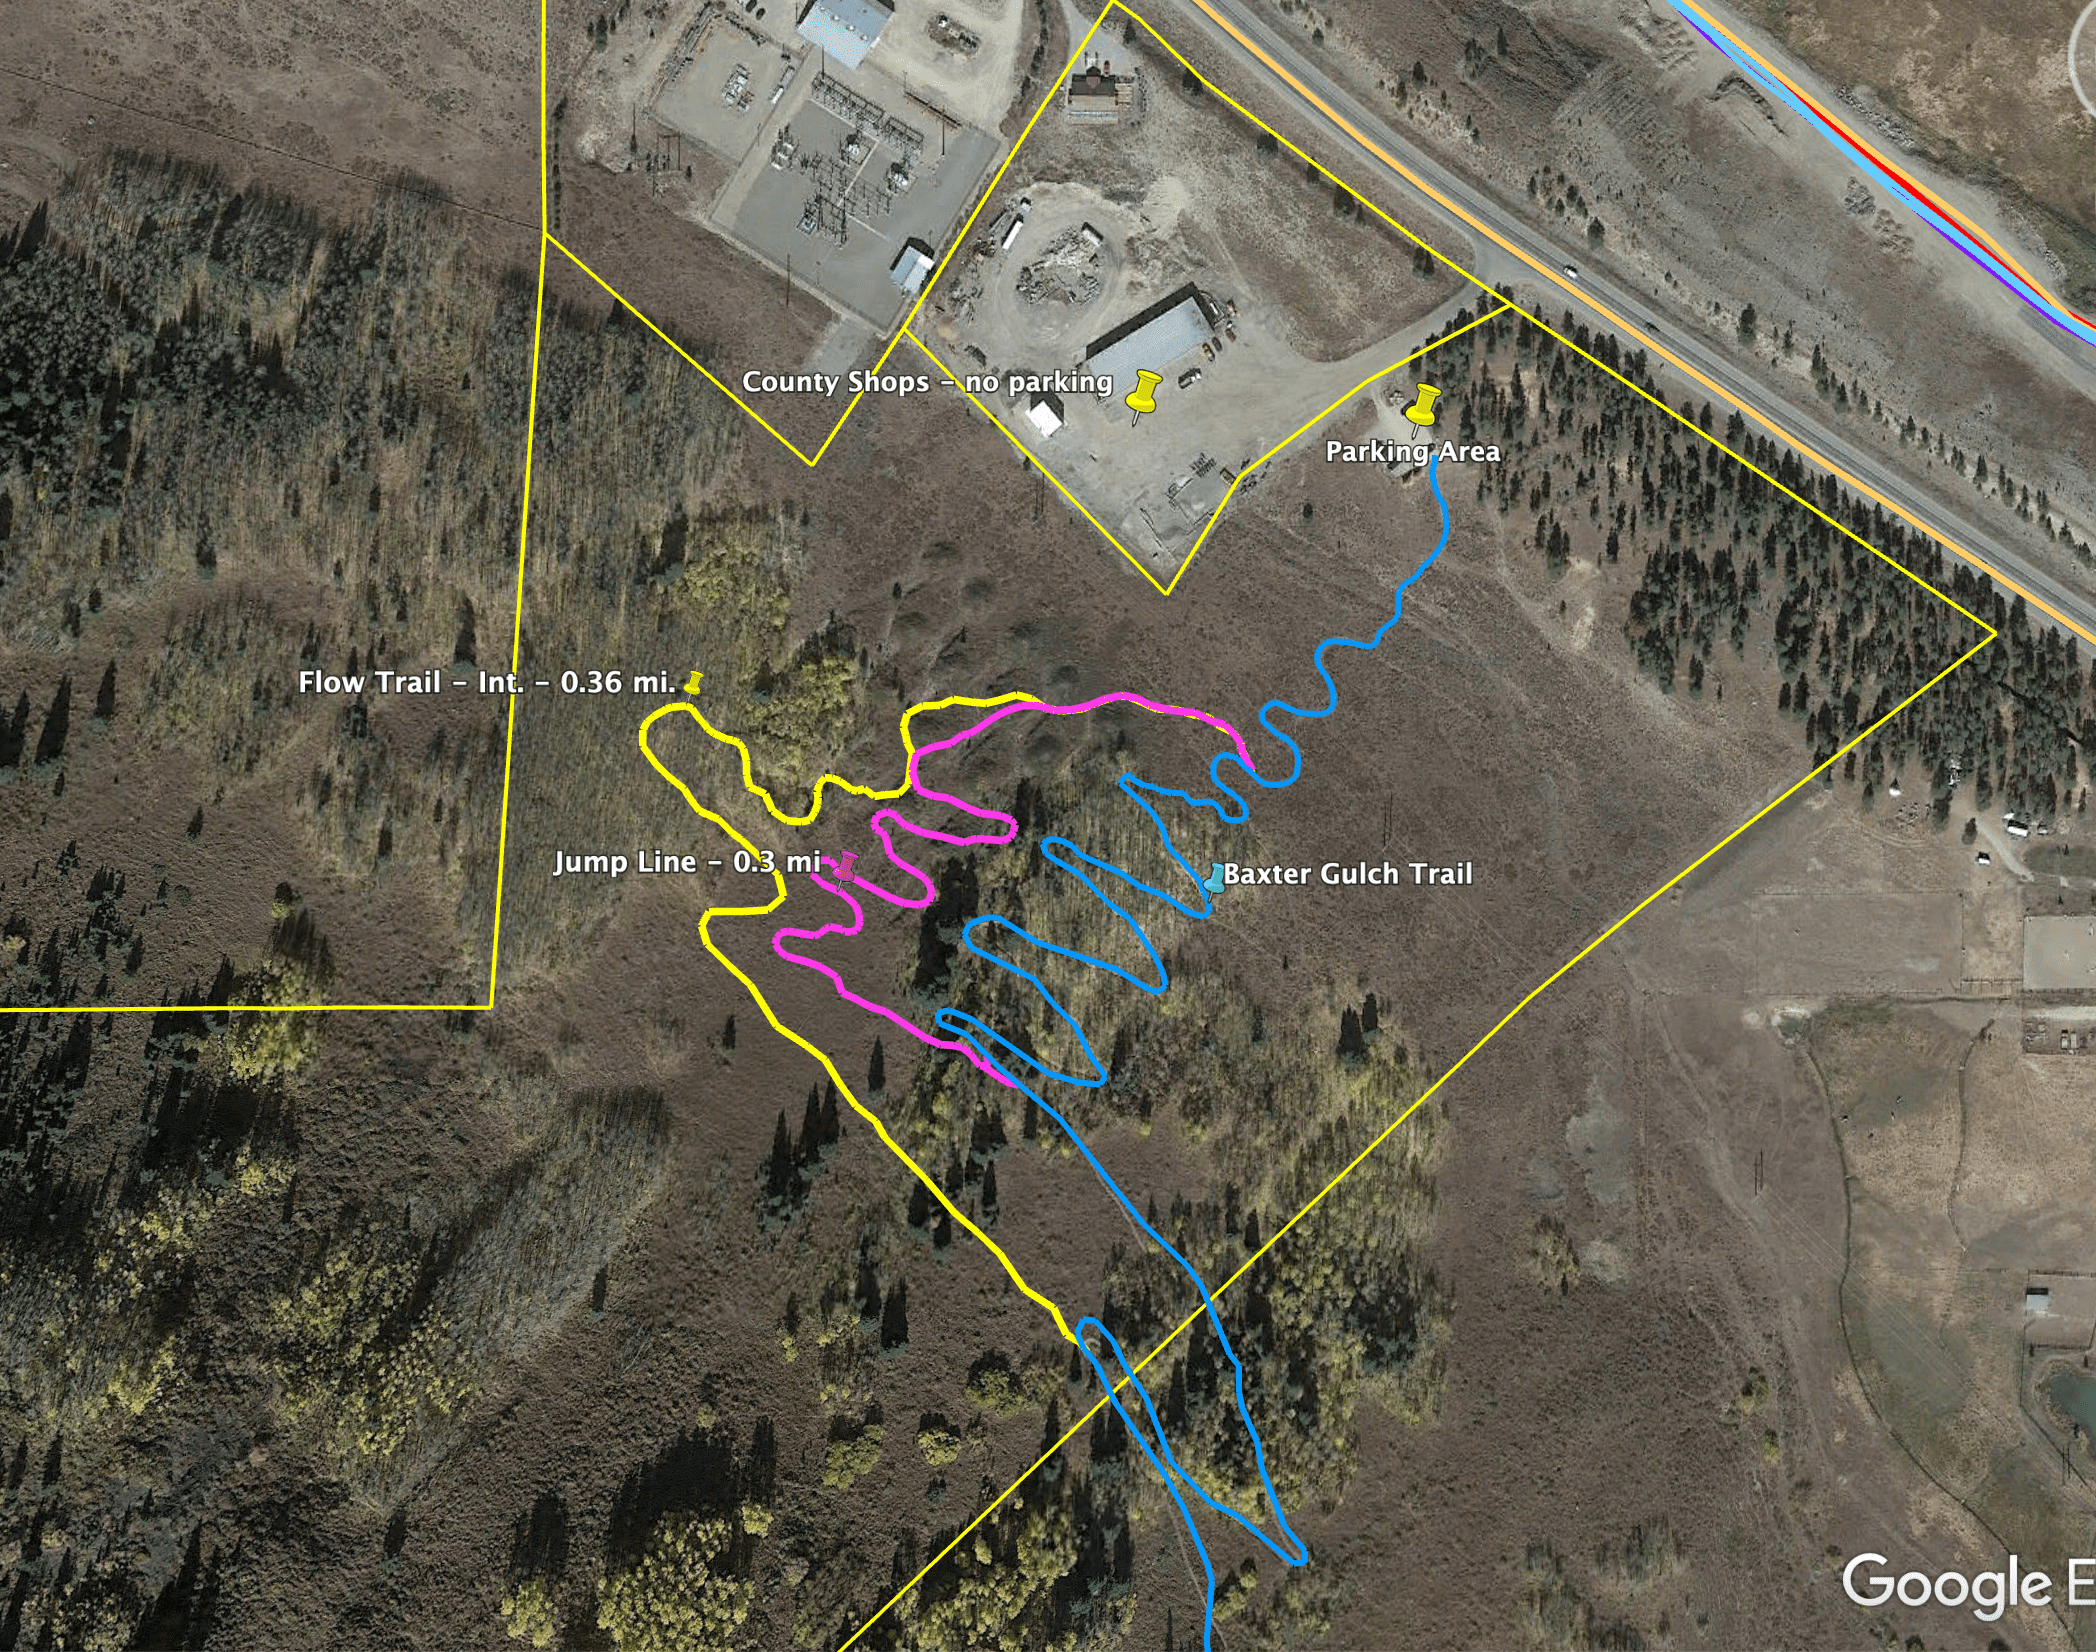 Map of Mogul Storage trails in Crested Butte.